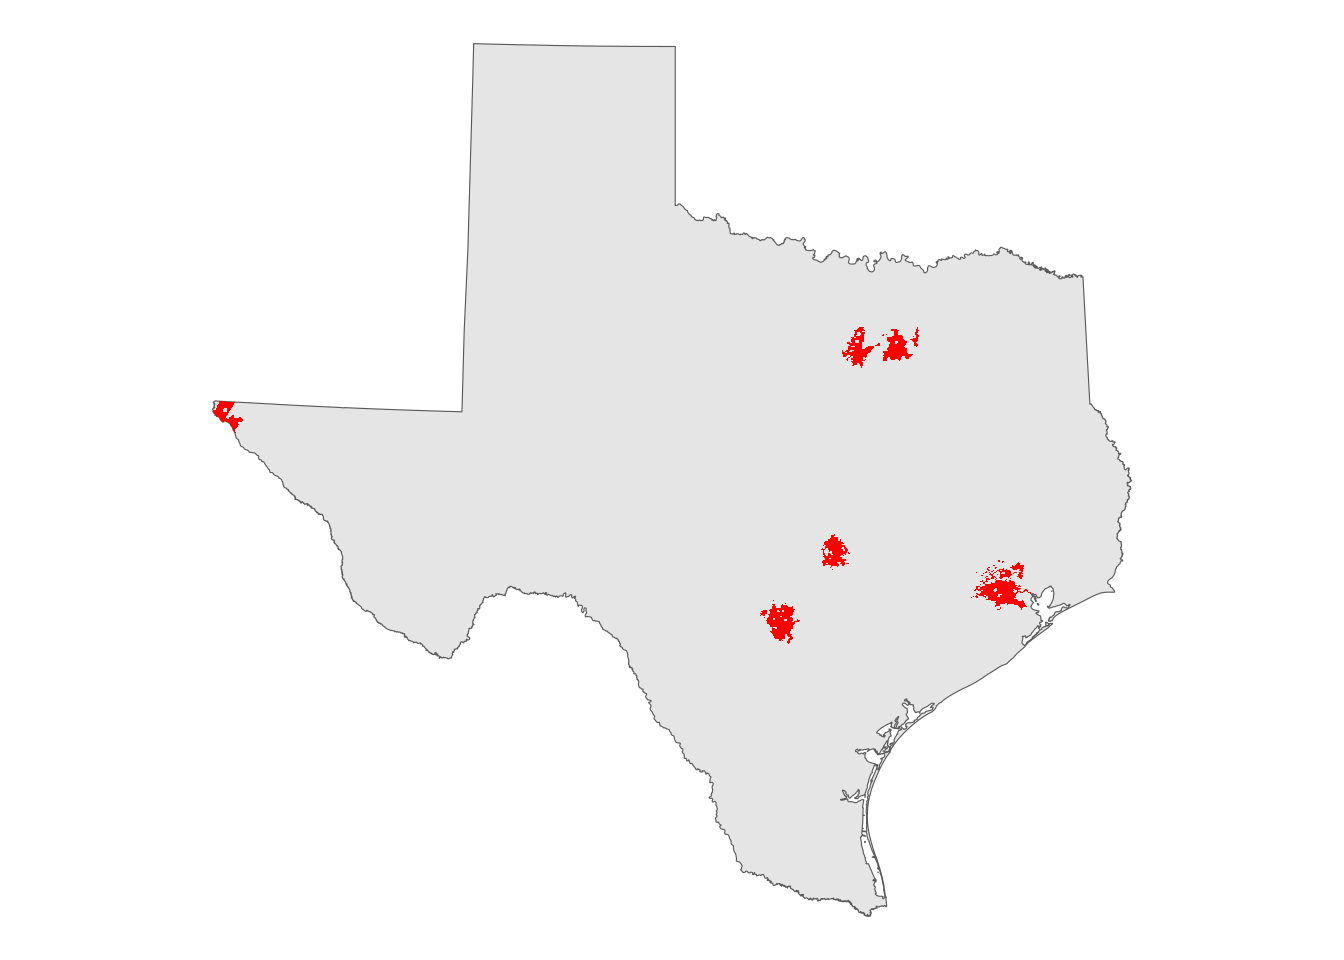 Large cities in Texas